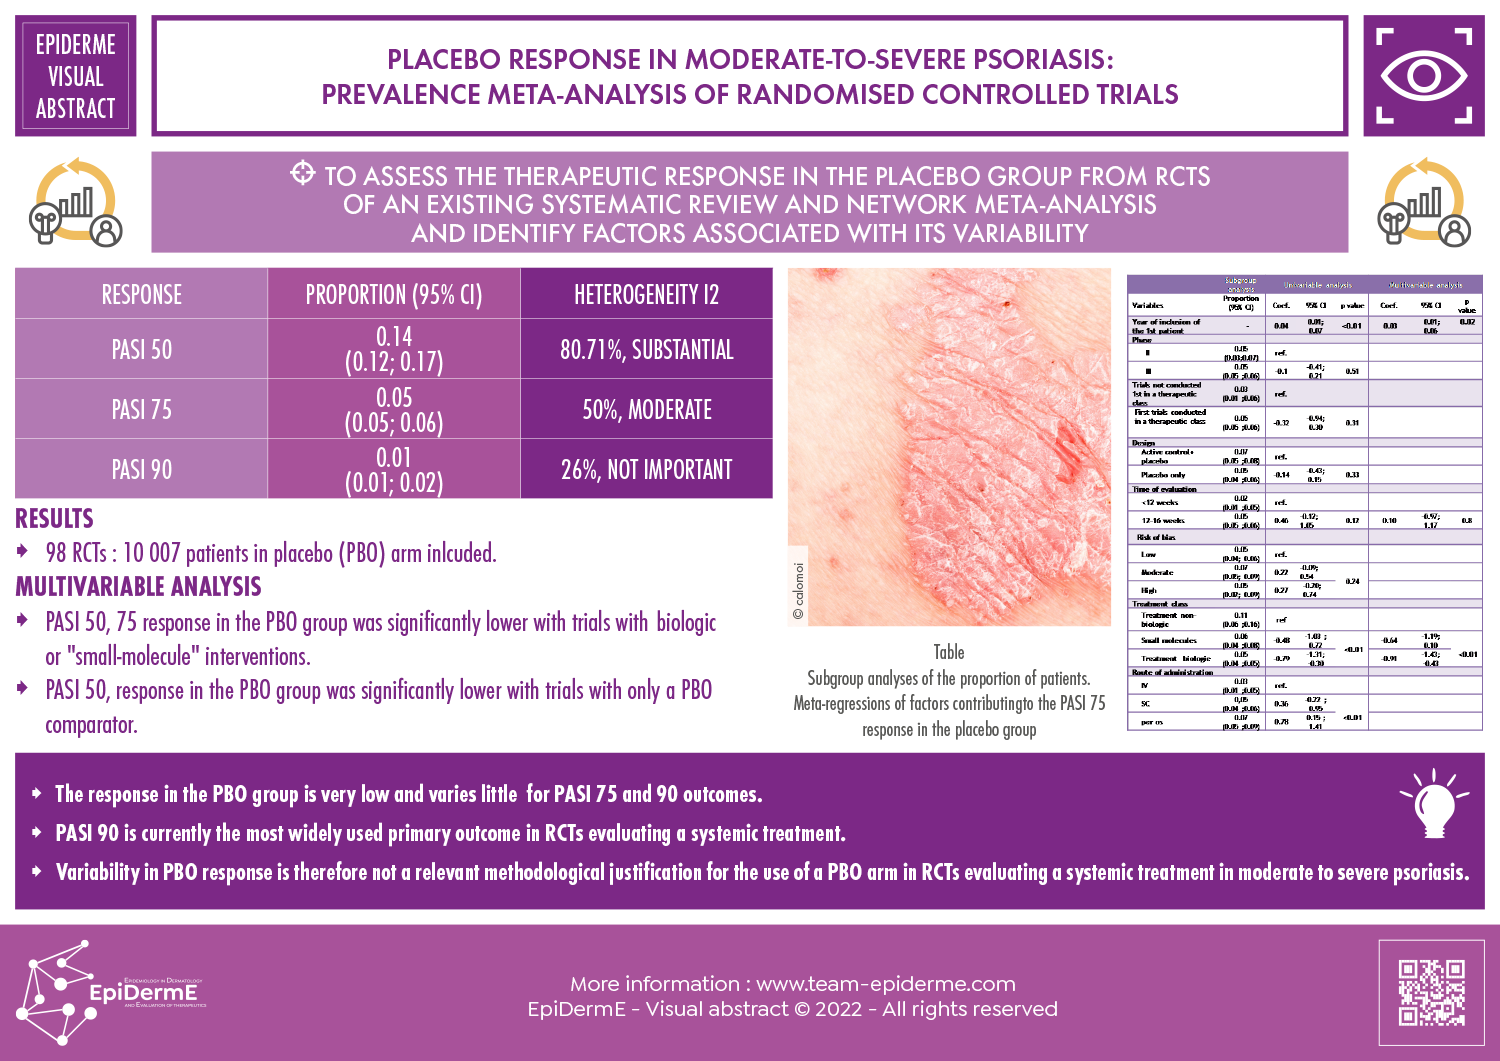 Placebo response in moderate-to-severe psoriasis: prevalence meta-analysis of randomised controlled trials